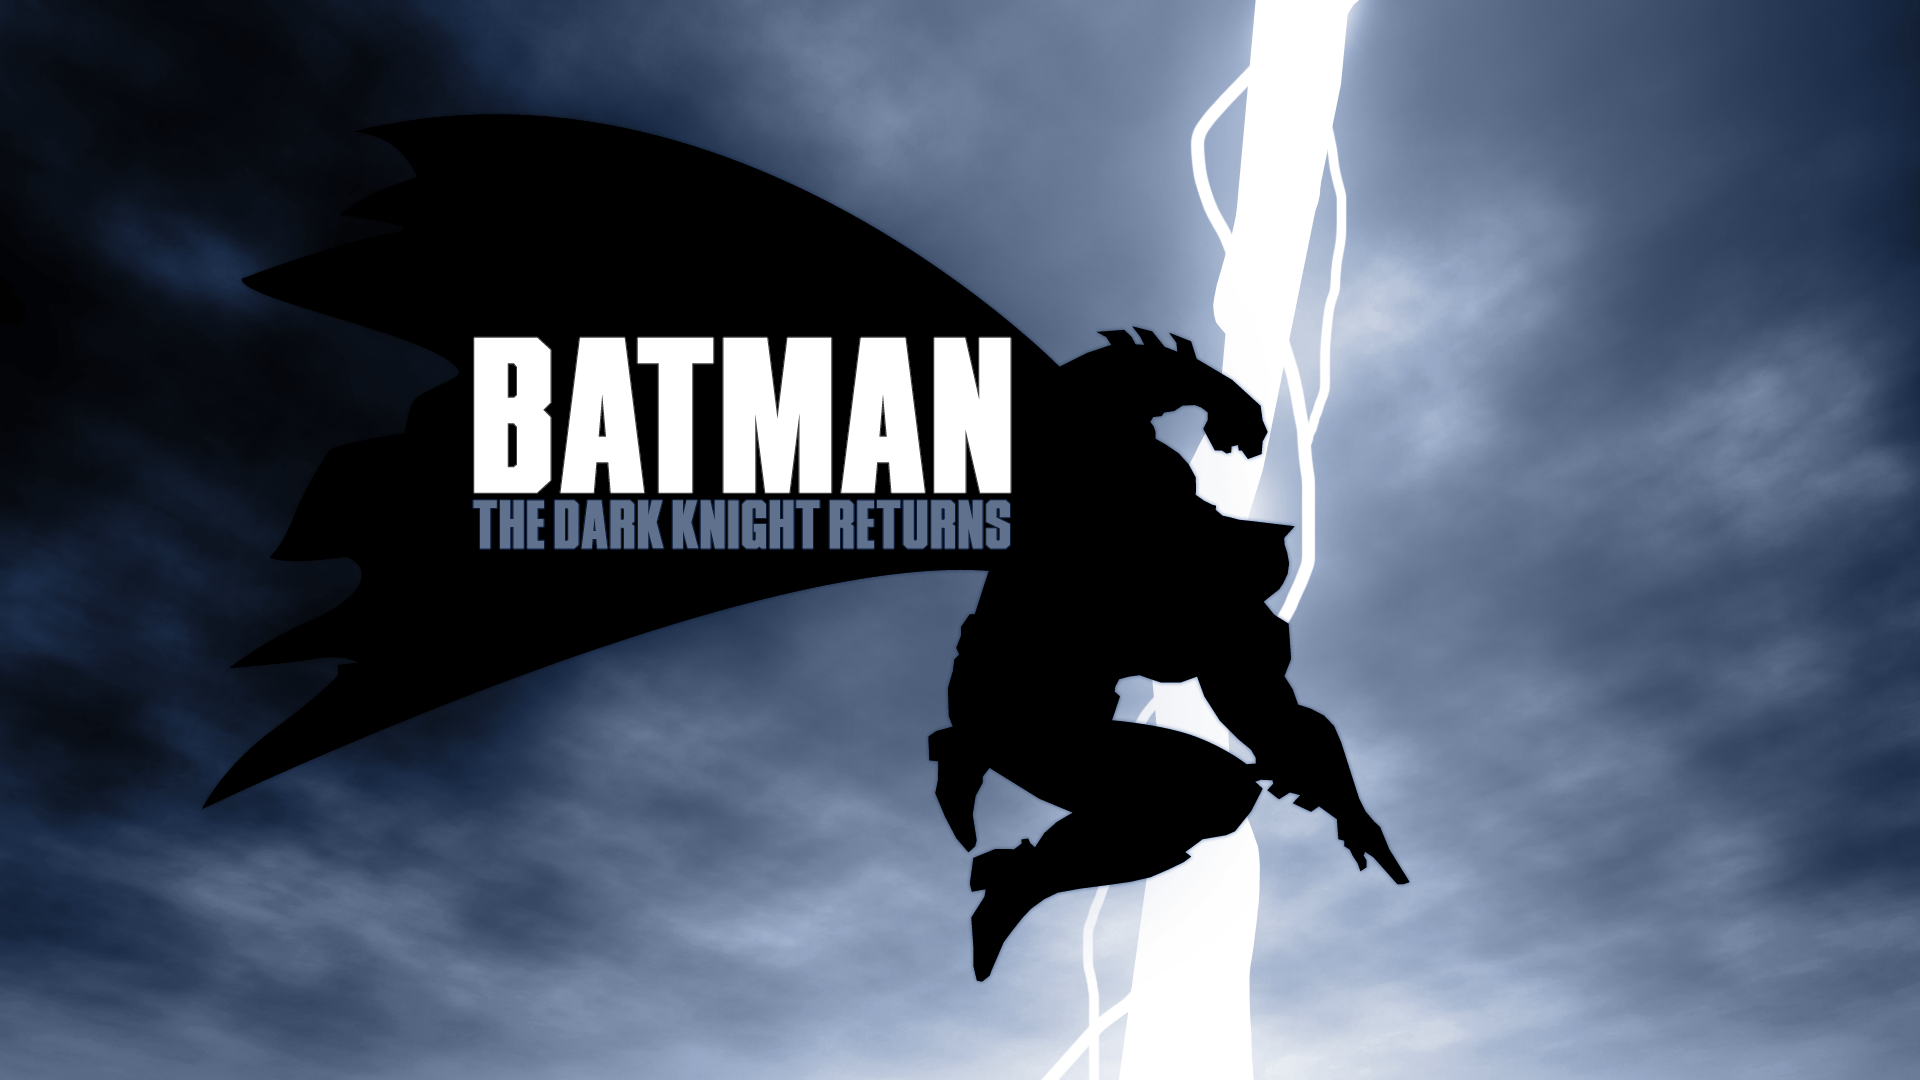 The Dark Knight Returns Wallpapers - Top Free The Dark Knight Returns